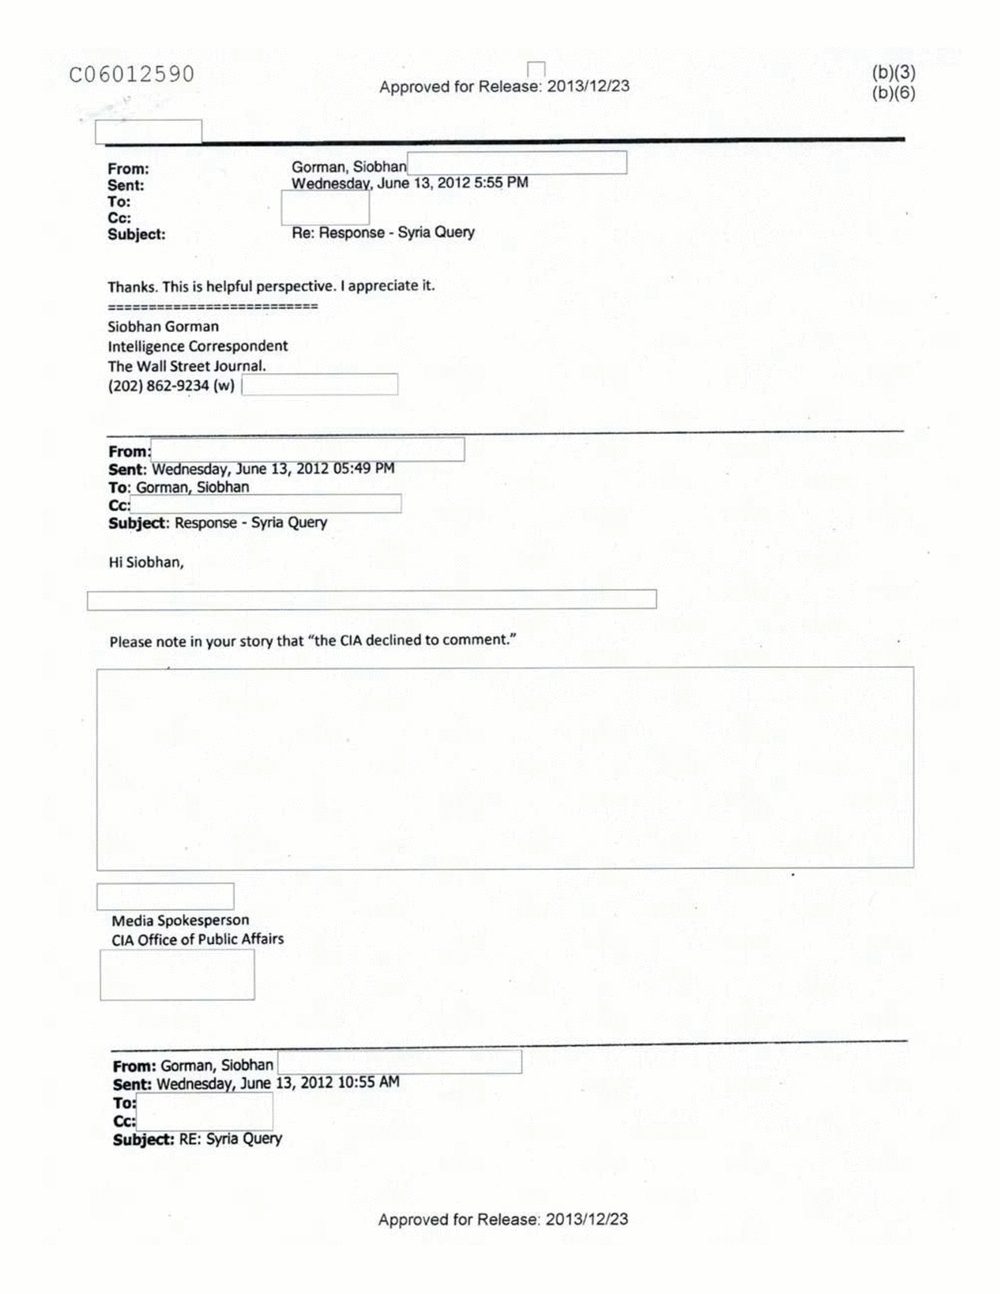 Page 142 from Email Correspondence Between Reporters and CIA Flacks